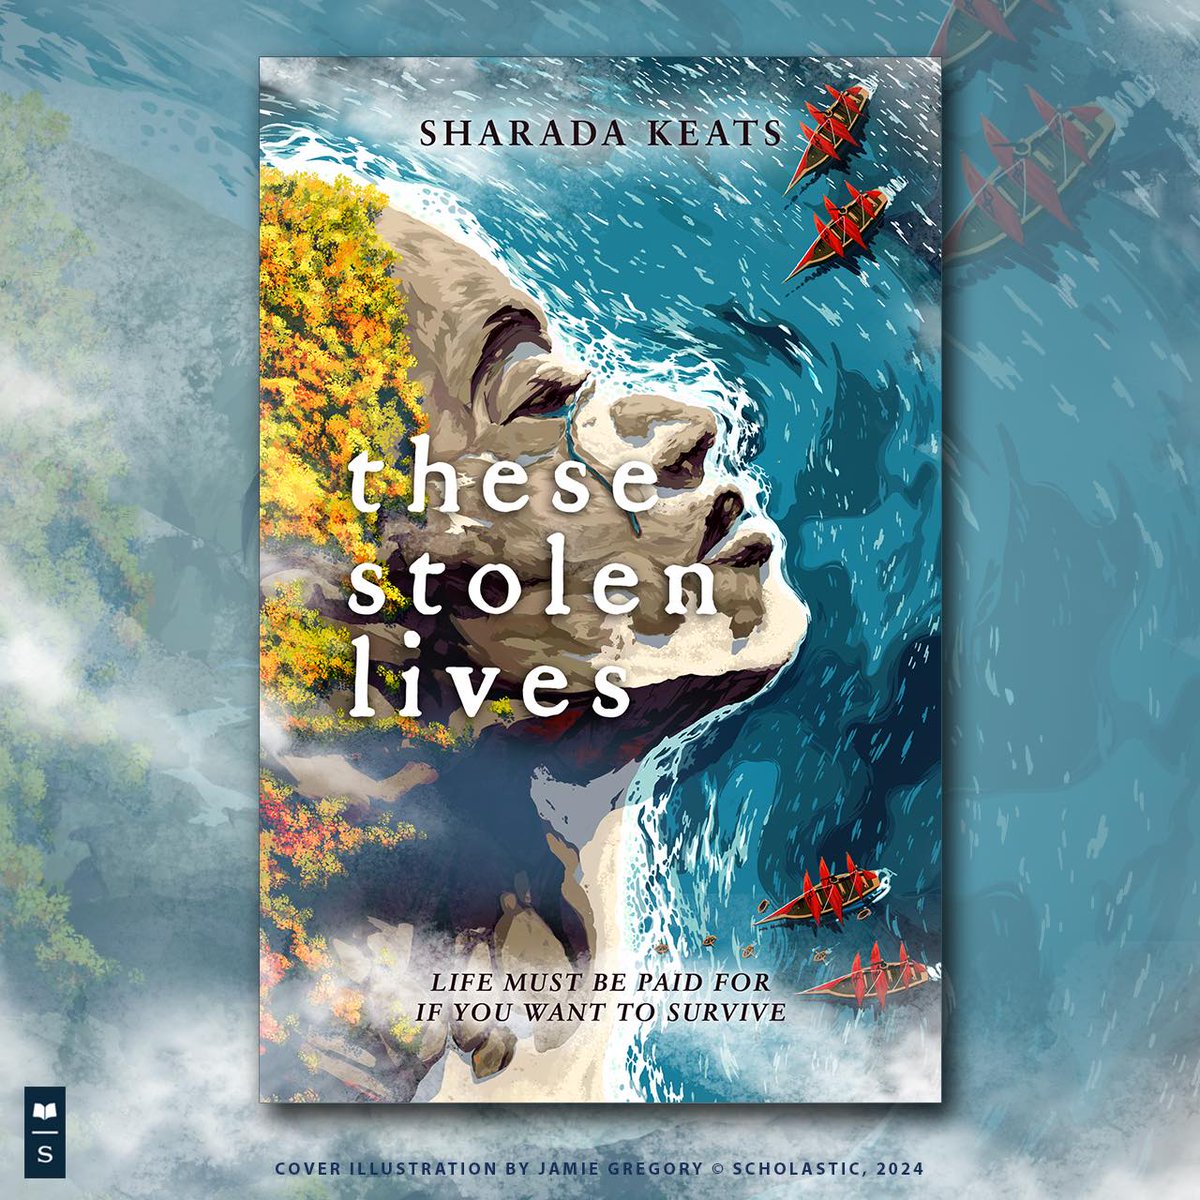 ✨IT'S PUBLICATION DAY!✨ @SharadaKeats's THESE STOLEN LIVES is published today by @Scholastic! Congratulations, Sharada! Get your copy here: tinyurl.com/24yrnf69